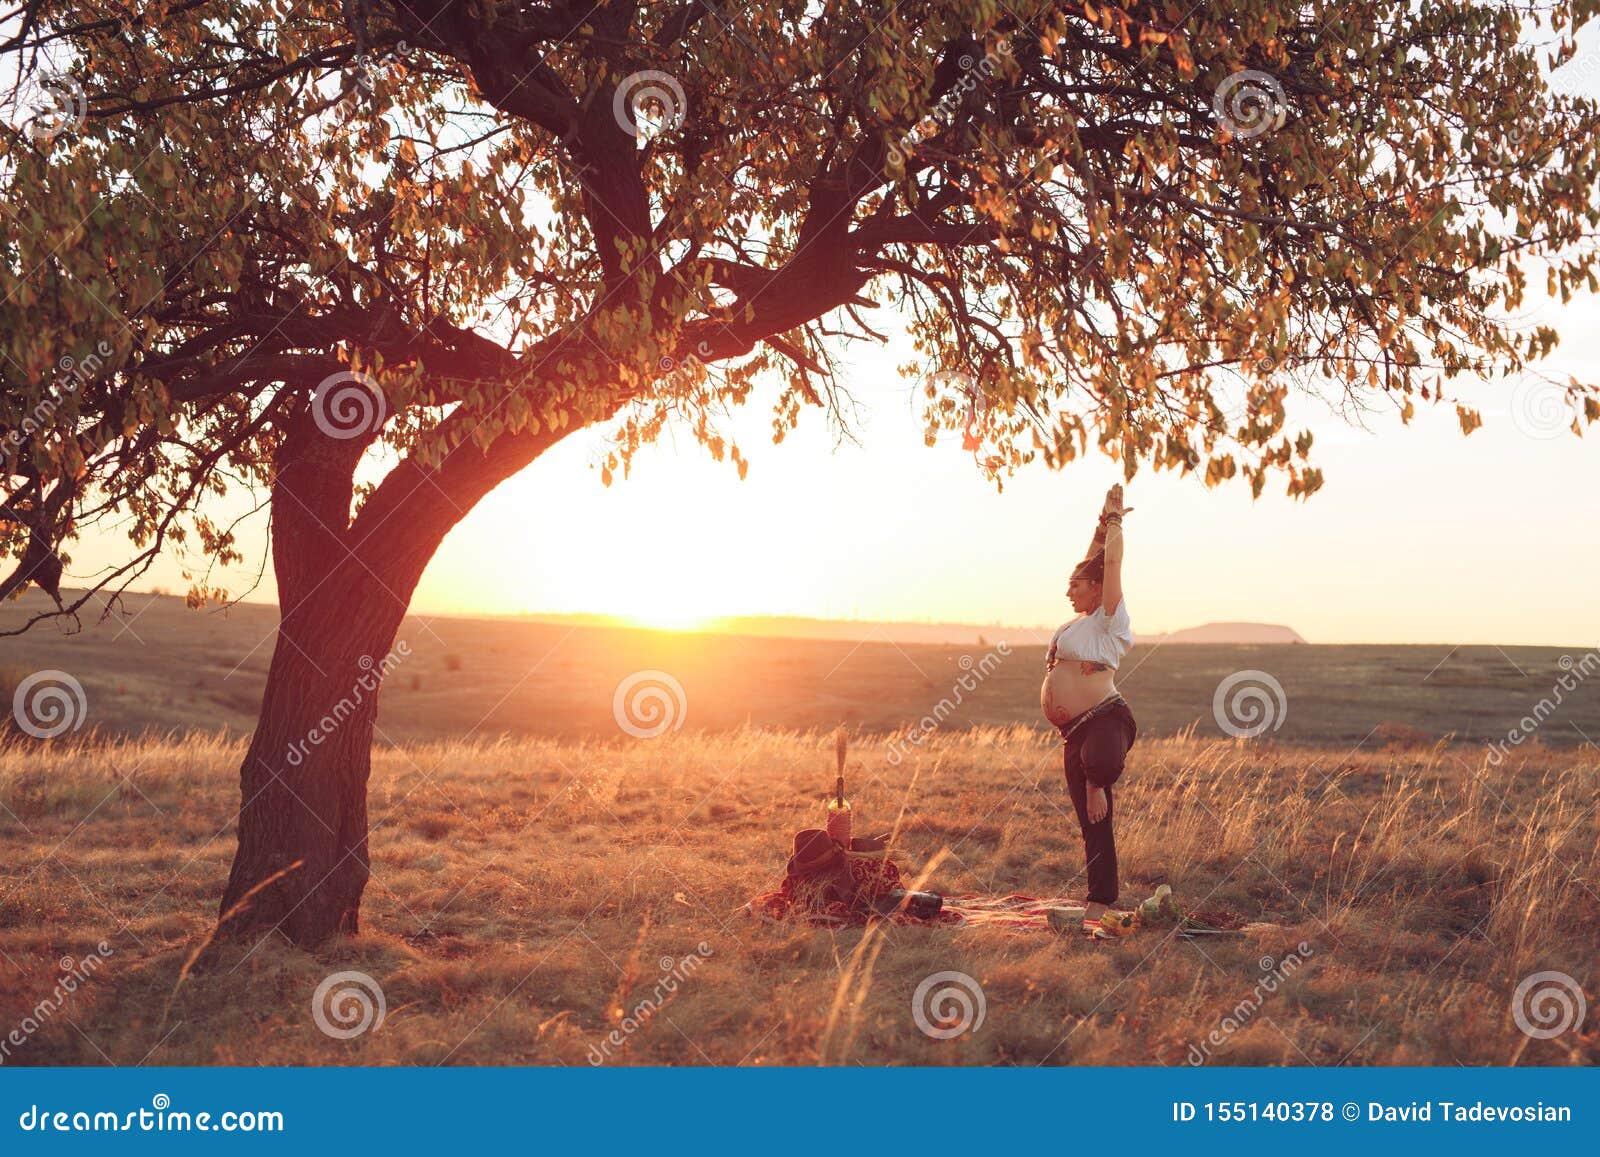 Pregnant Woman Doing Yoga in the Field at Sunset. Girl Holding a Dream ...